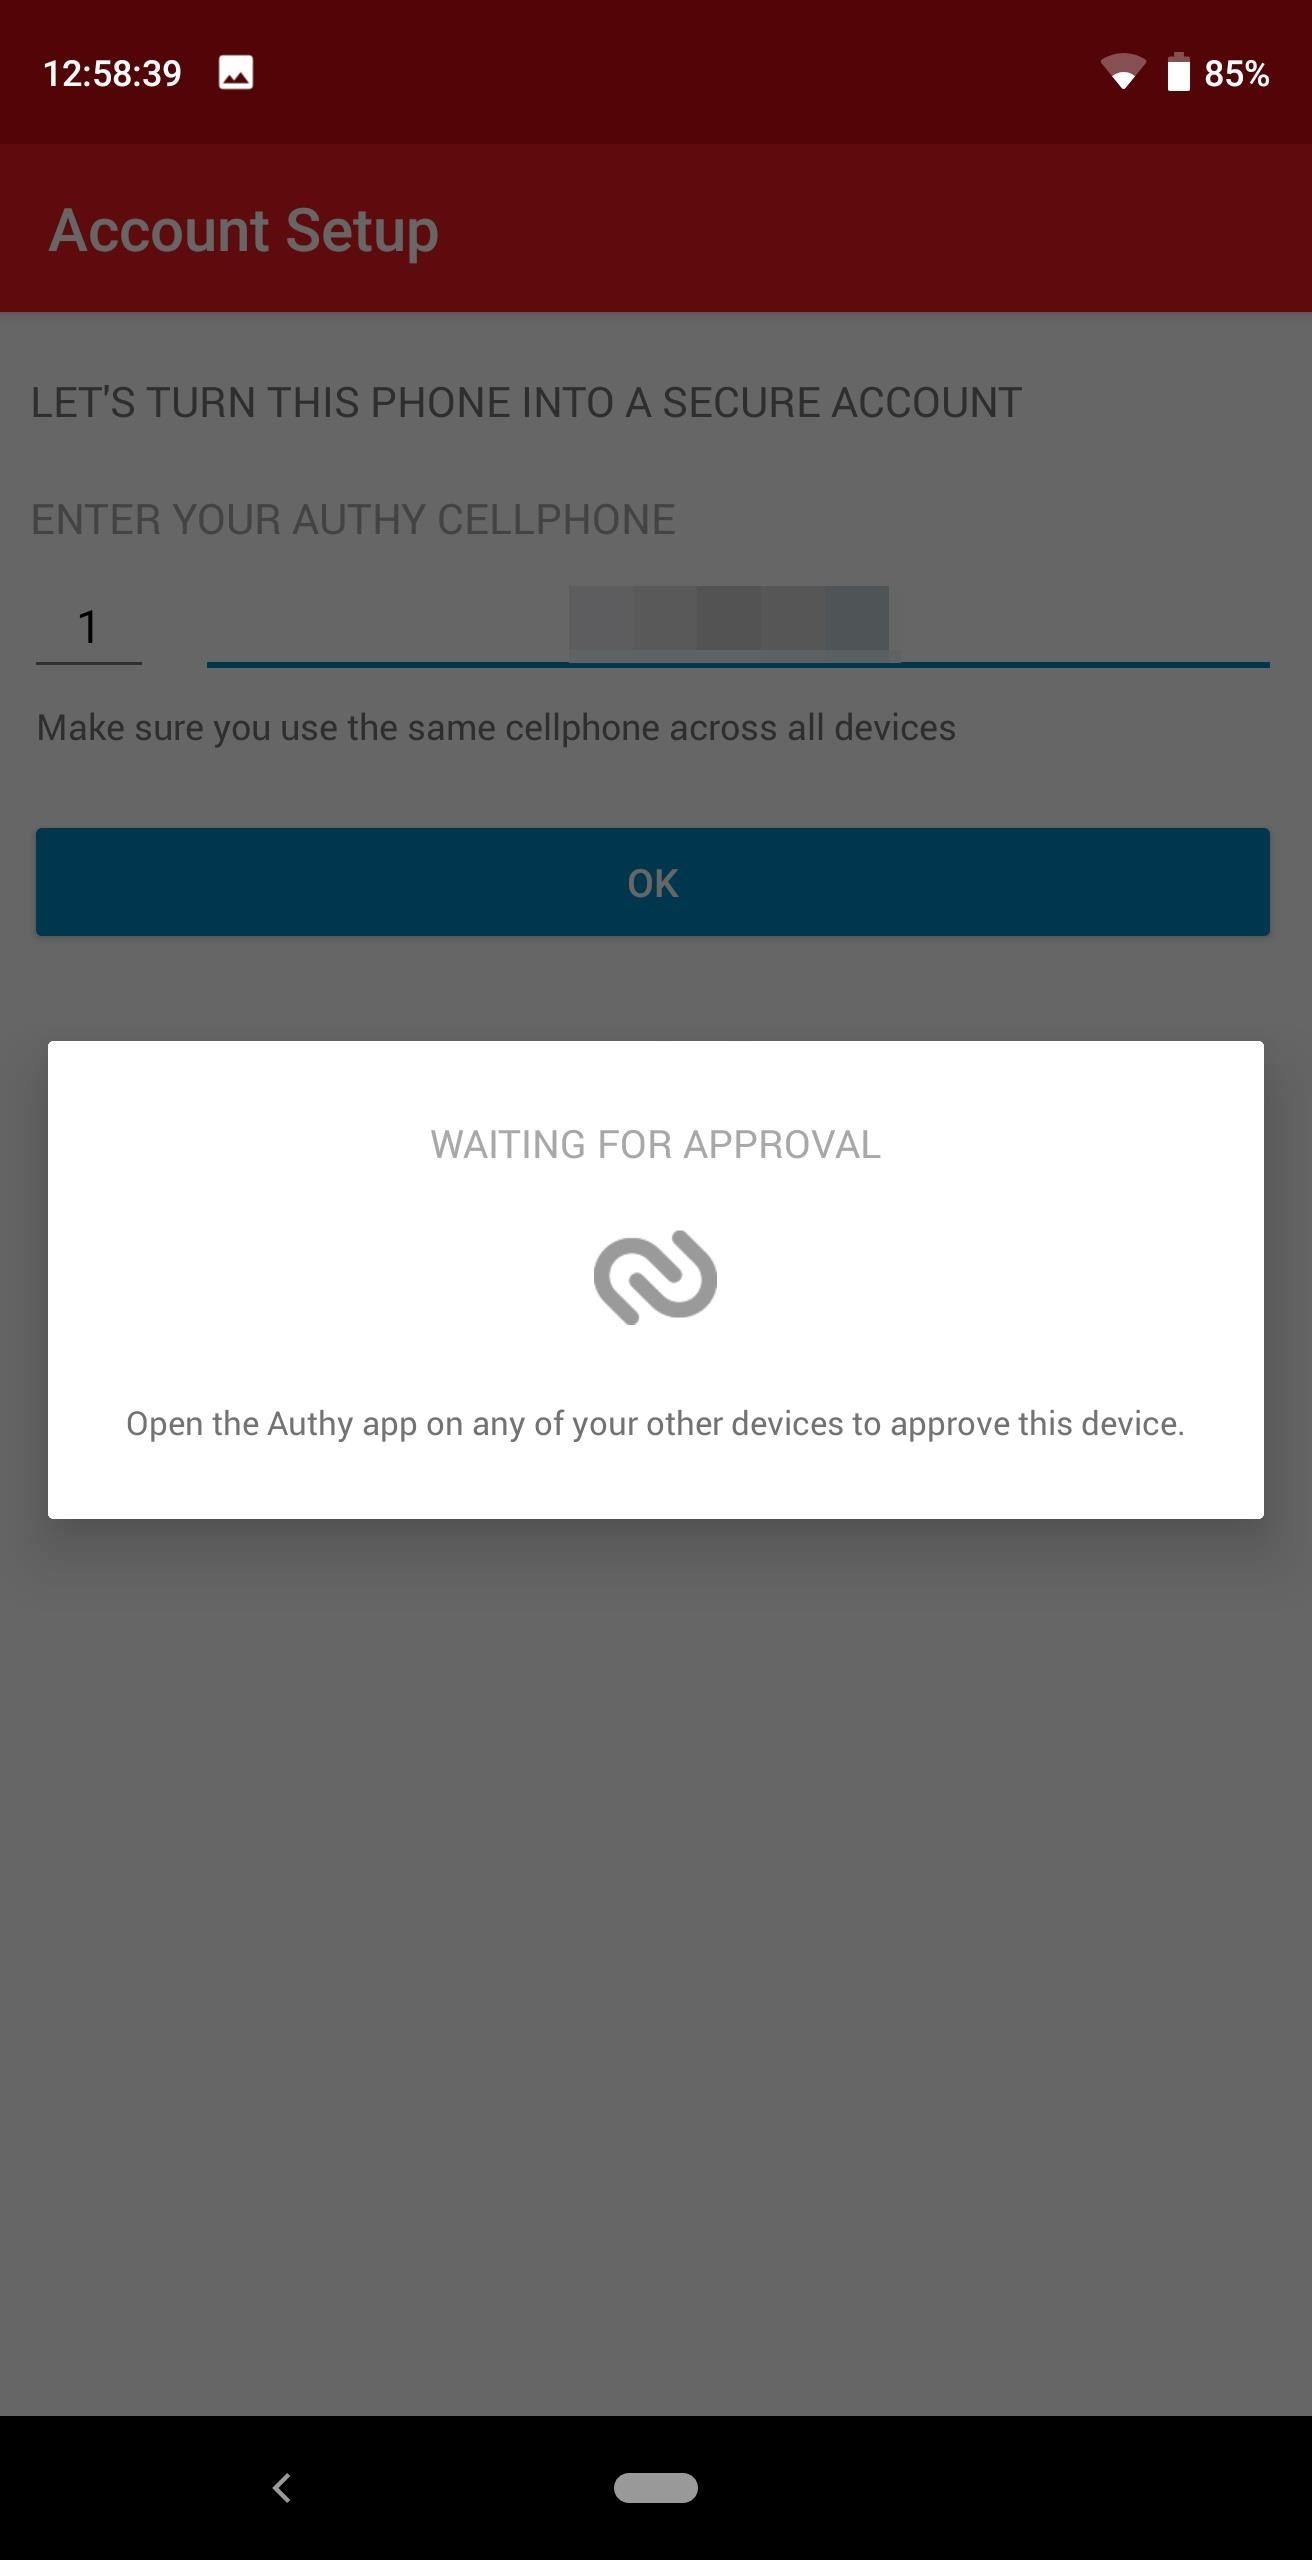 How to Transfer Your Authy Account to a New Phone